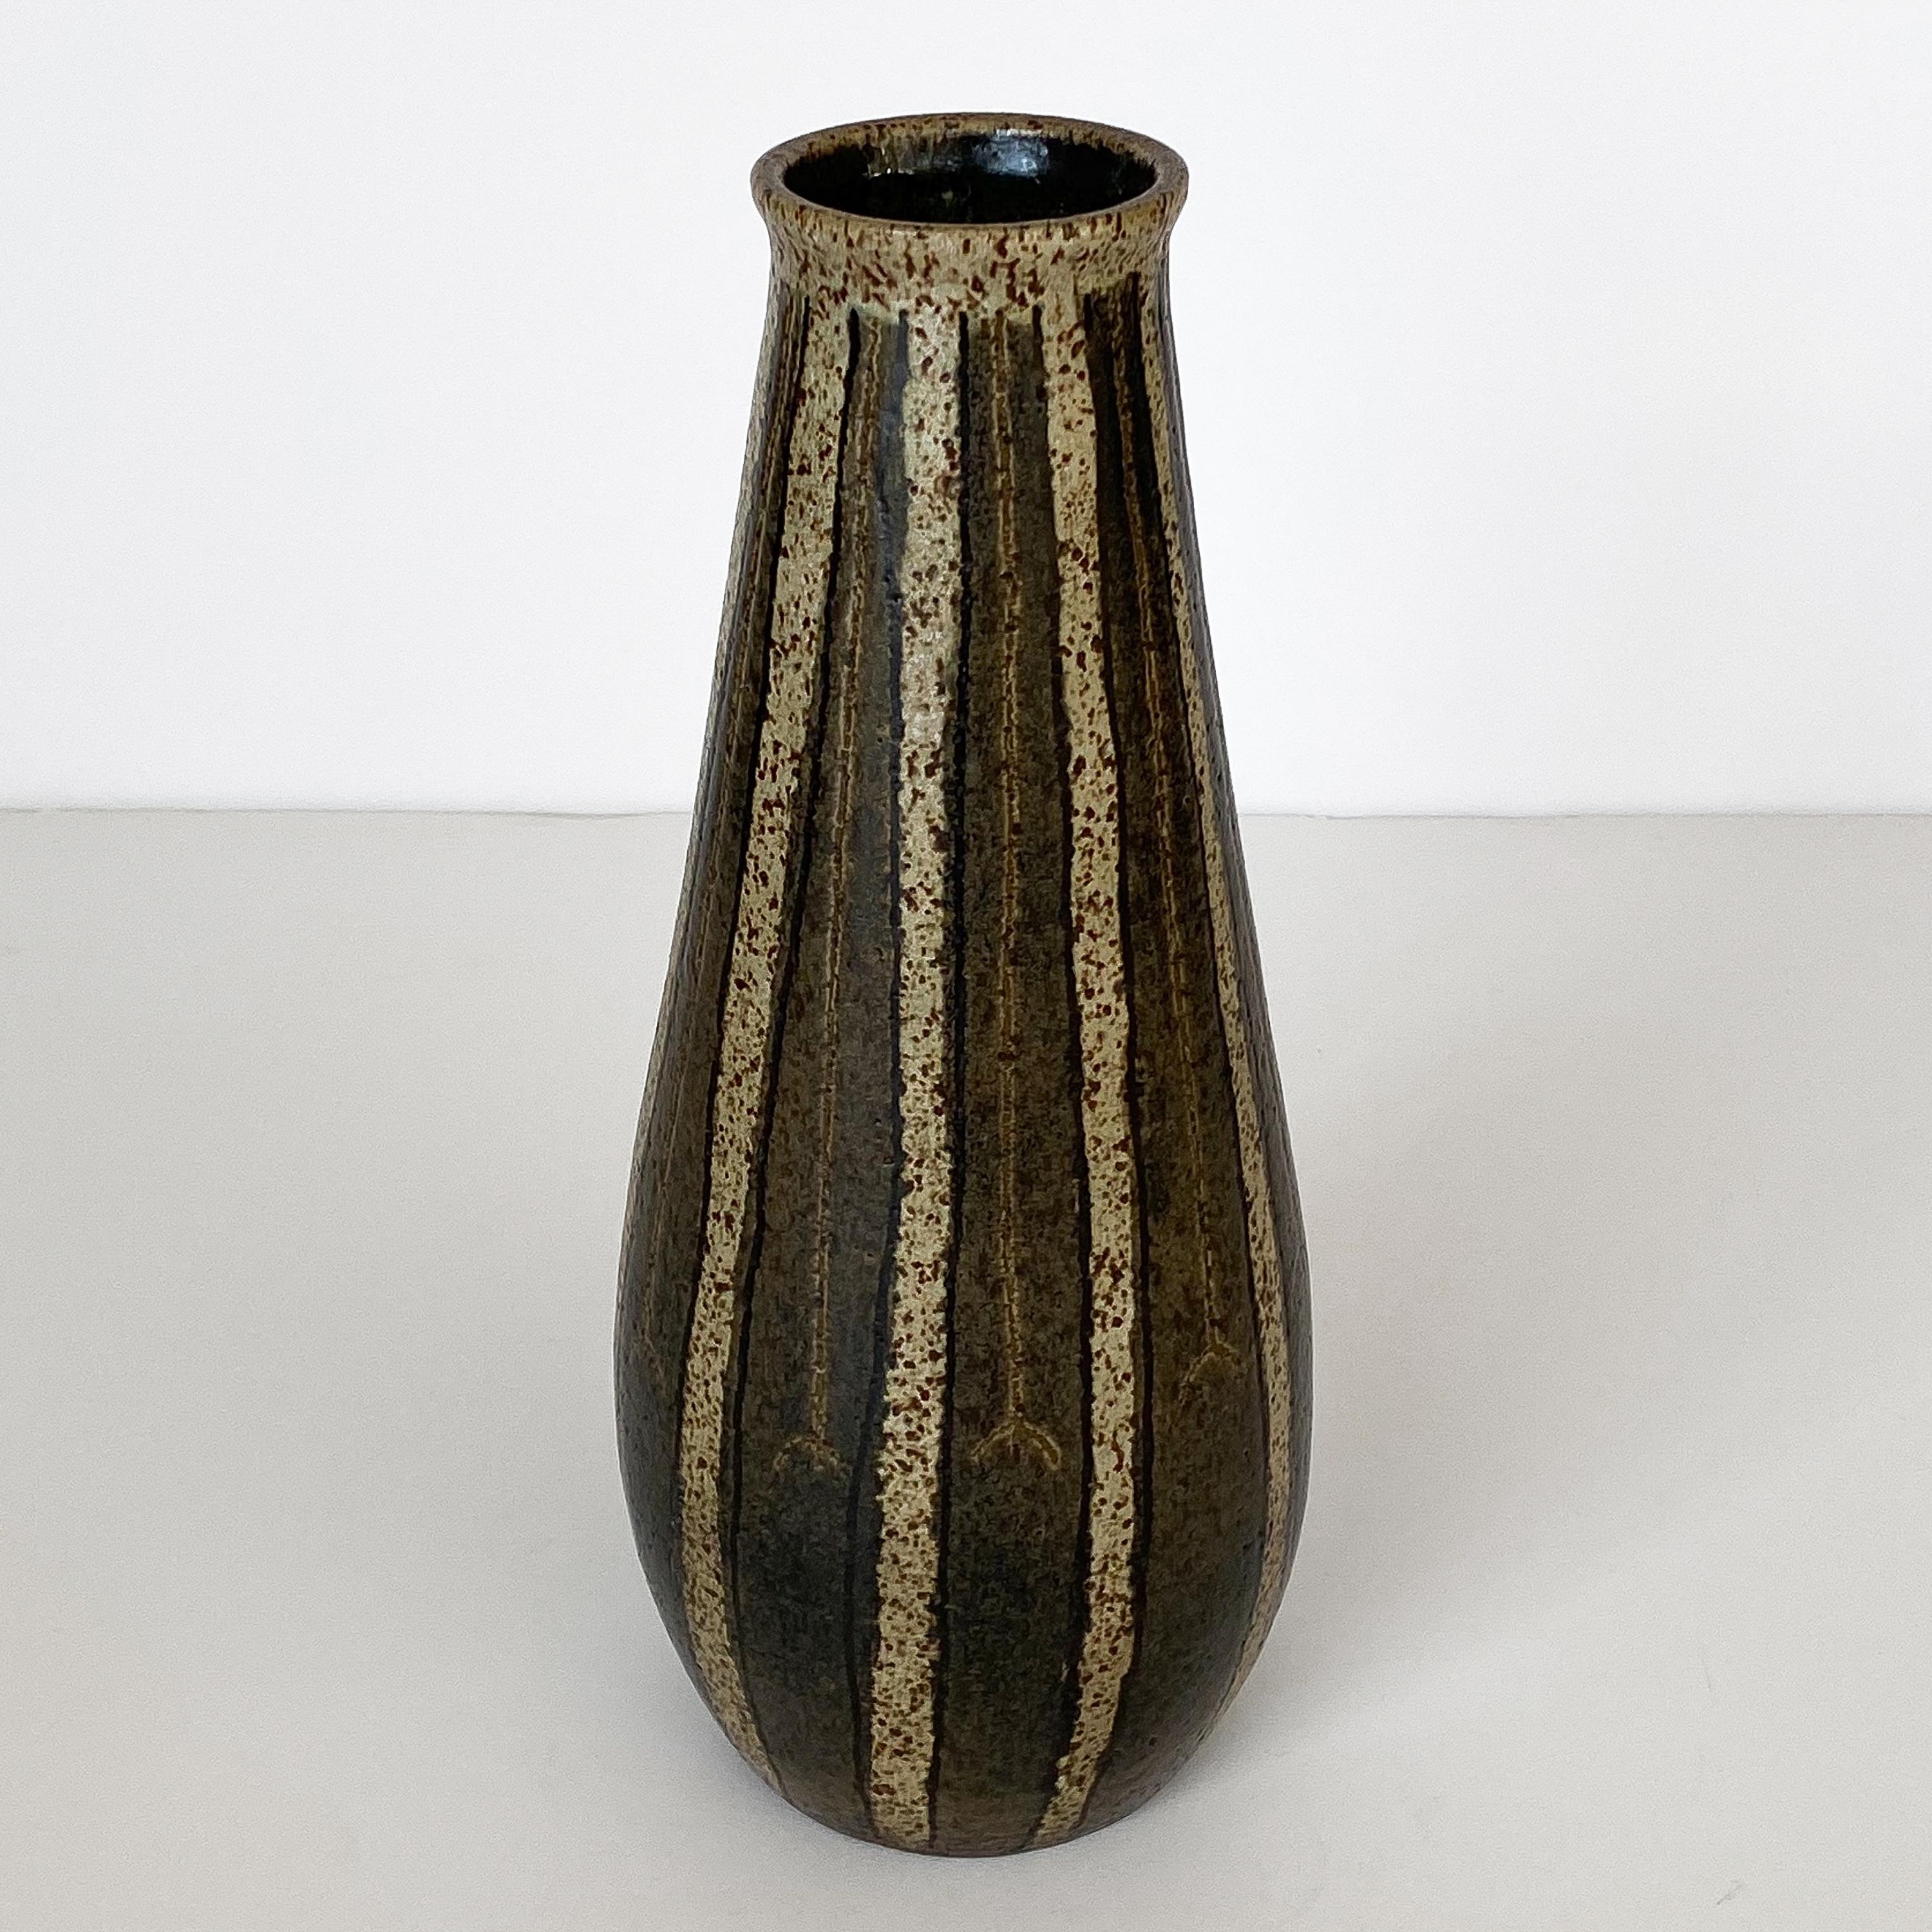 Abraham Cohn Studio Pottery vase glazed in earth tones of browns, tan and black with striped pattern, circa early 1950s. Abe Cohn was a Wisconsin based potter. Measures: Overall 12.75